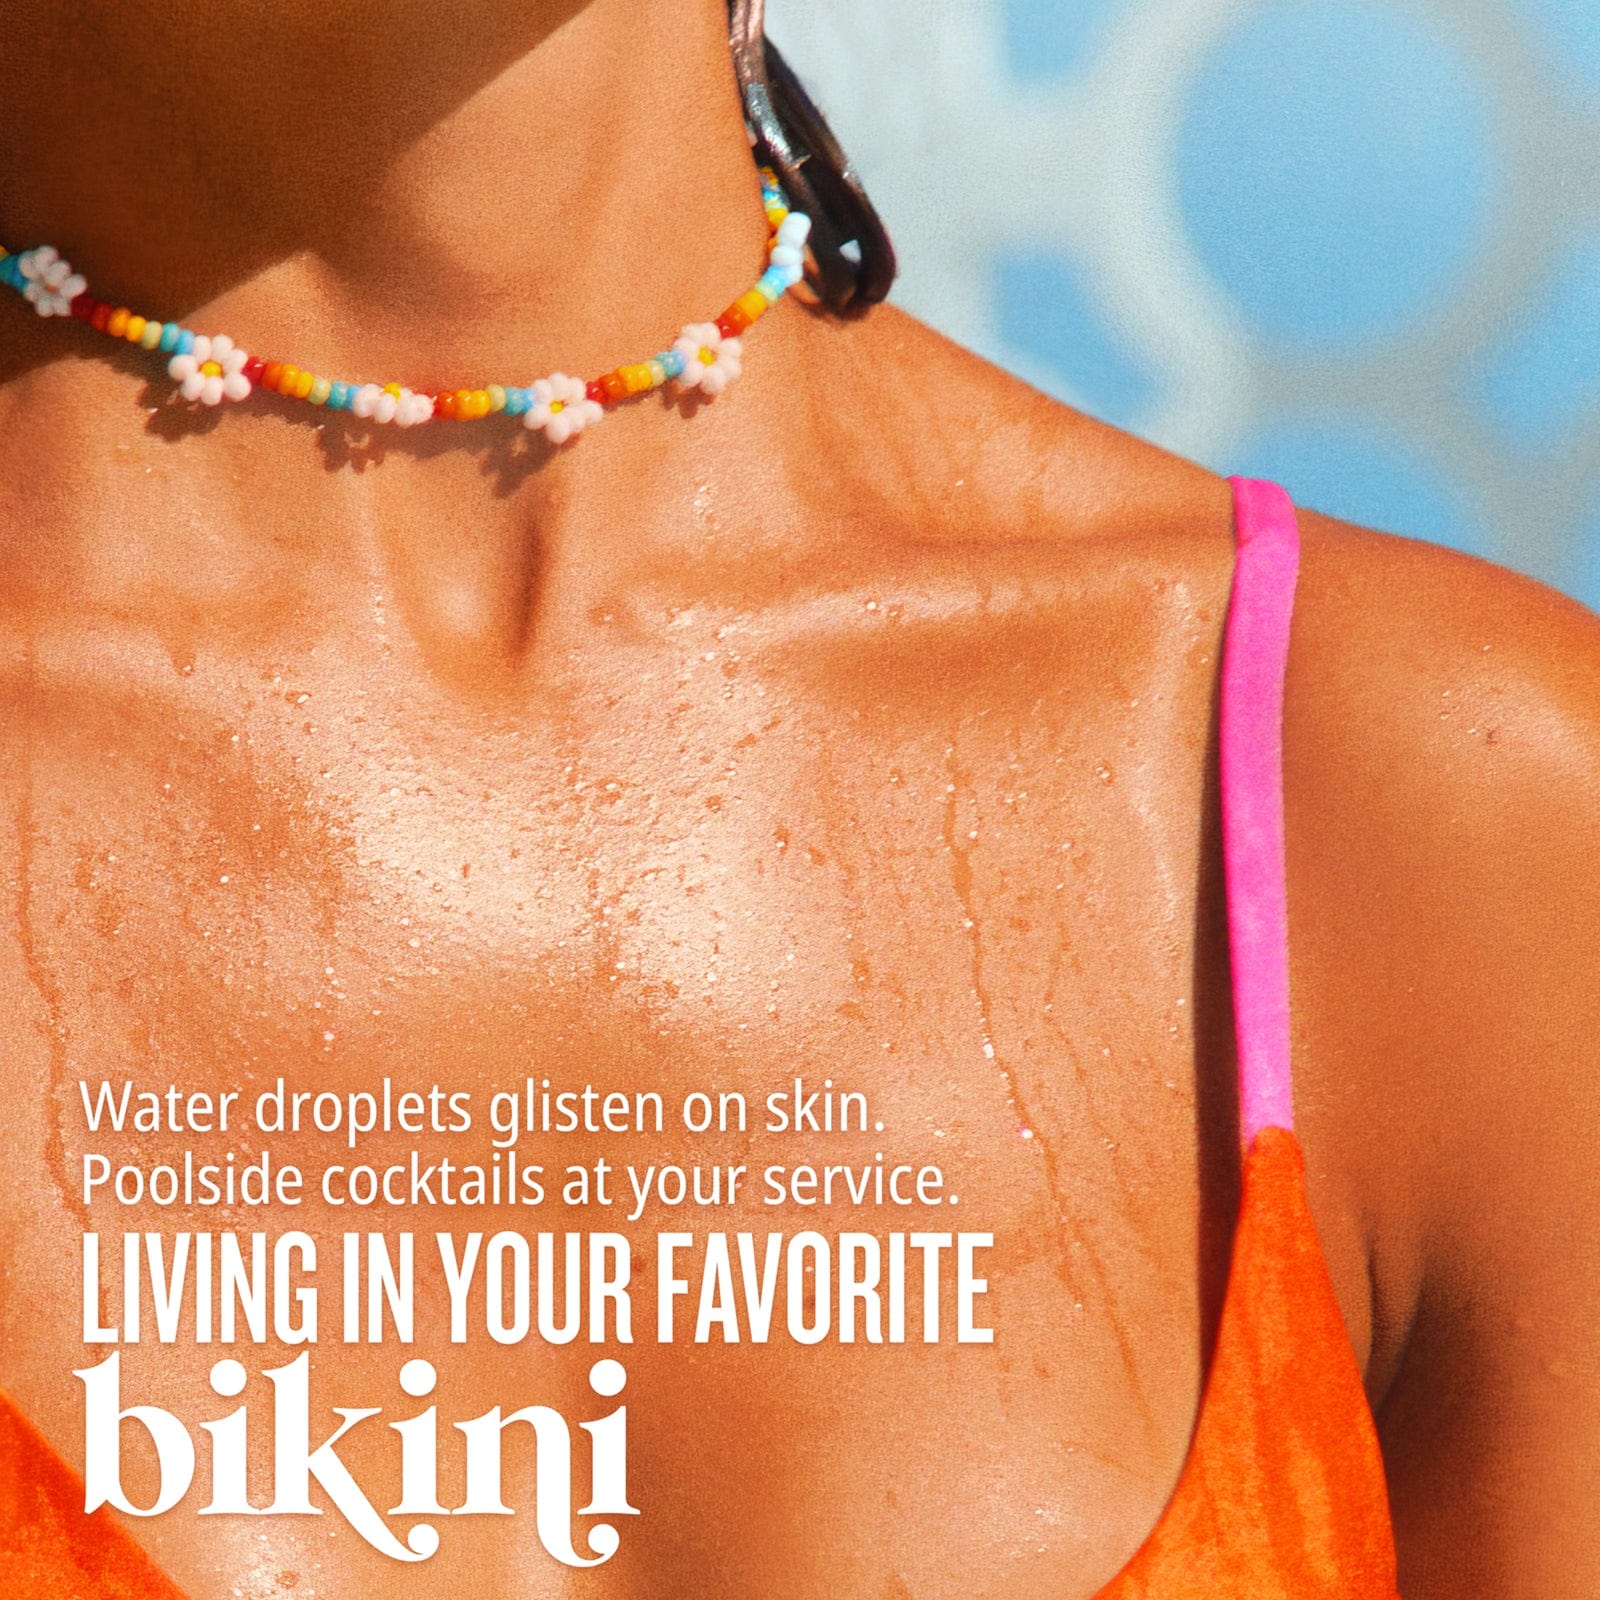 water droplets glisten on skin. Poolside cocktails at your service. Living in your favorite bikini